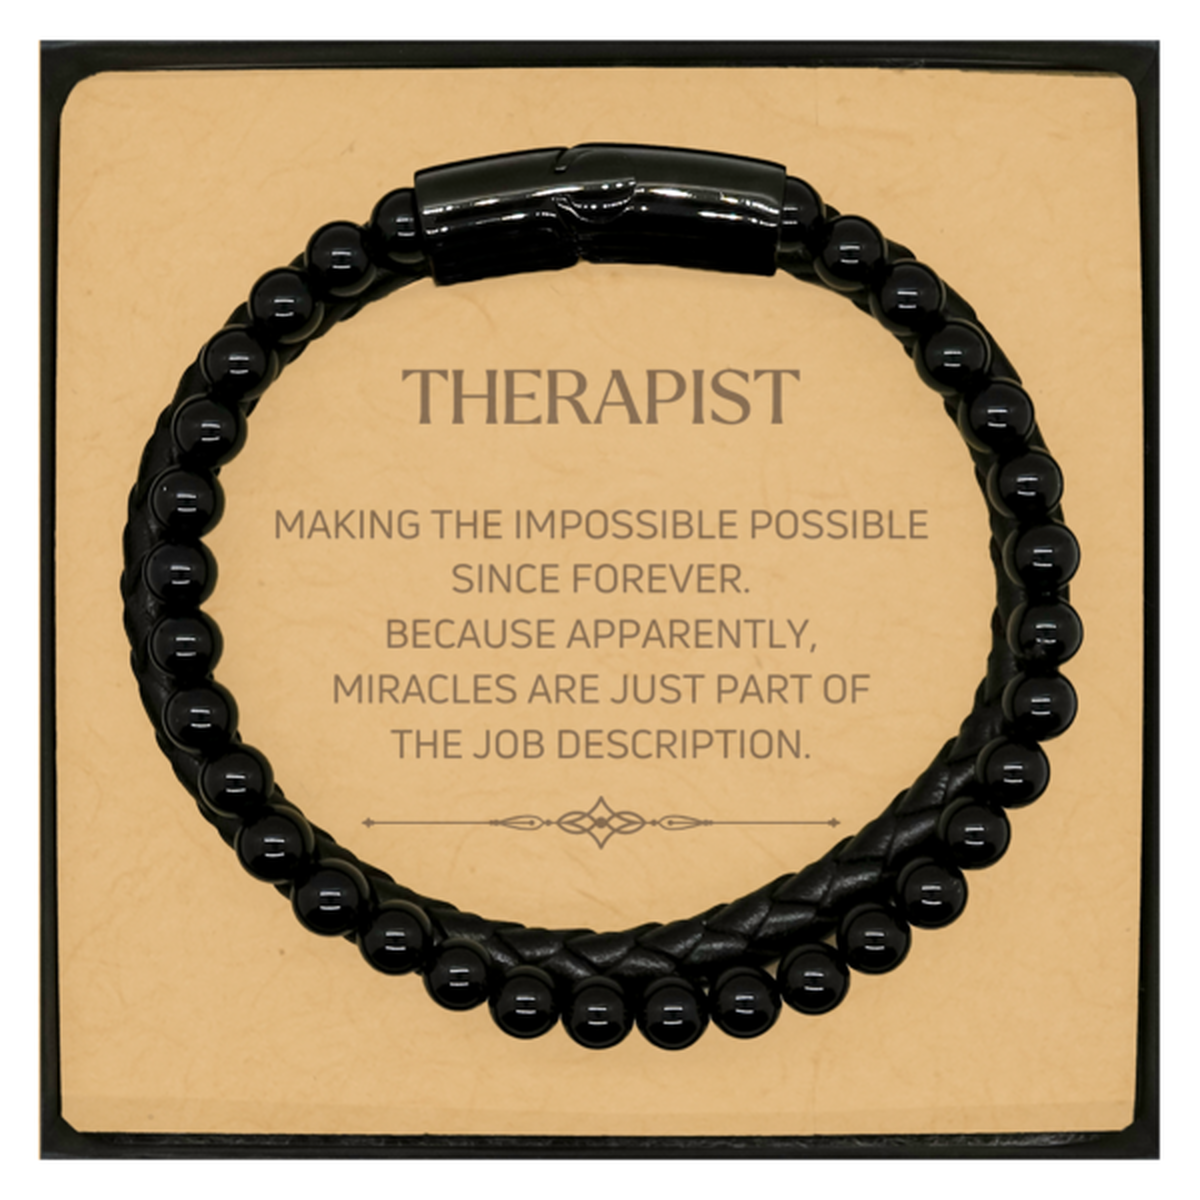 Funny Therapist Gifts, Miracles are just part of the job description, Inspirational Birthday Christmas Stone Leather Bracelets For Therapist, Men, Women, Coworkers, Friends, Boss